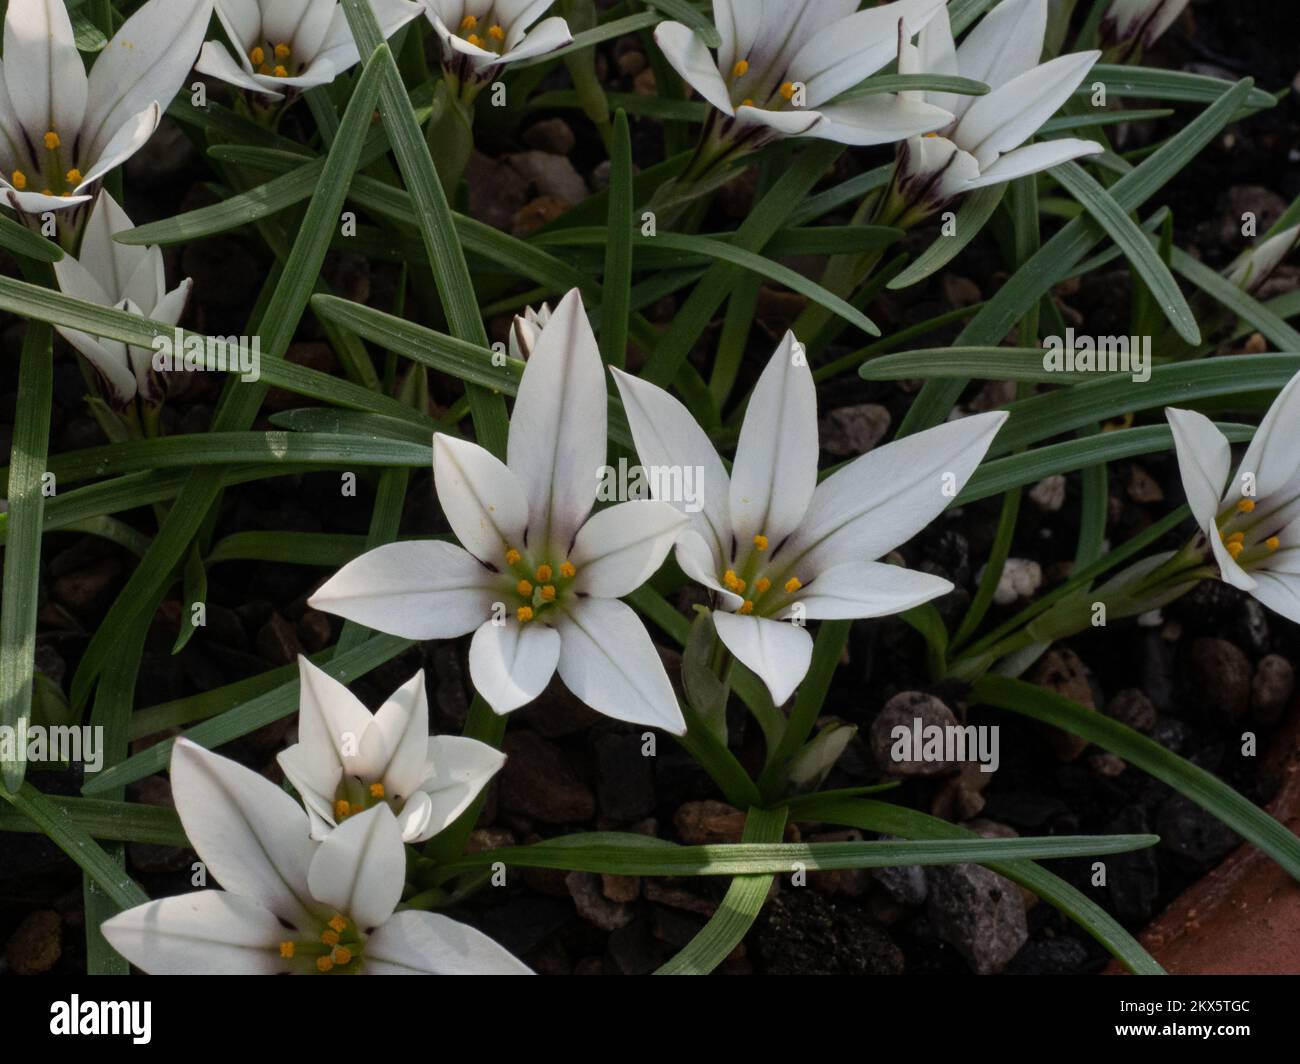 A close up of a group of white starry flowers of Ipheion sessile Stock Photo